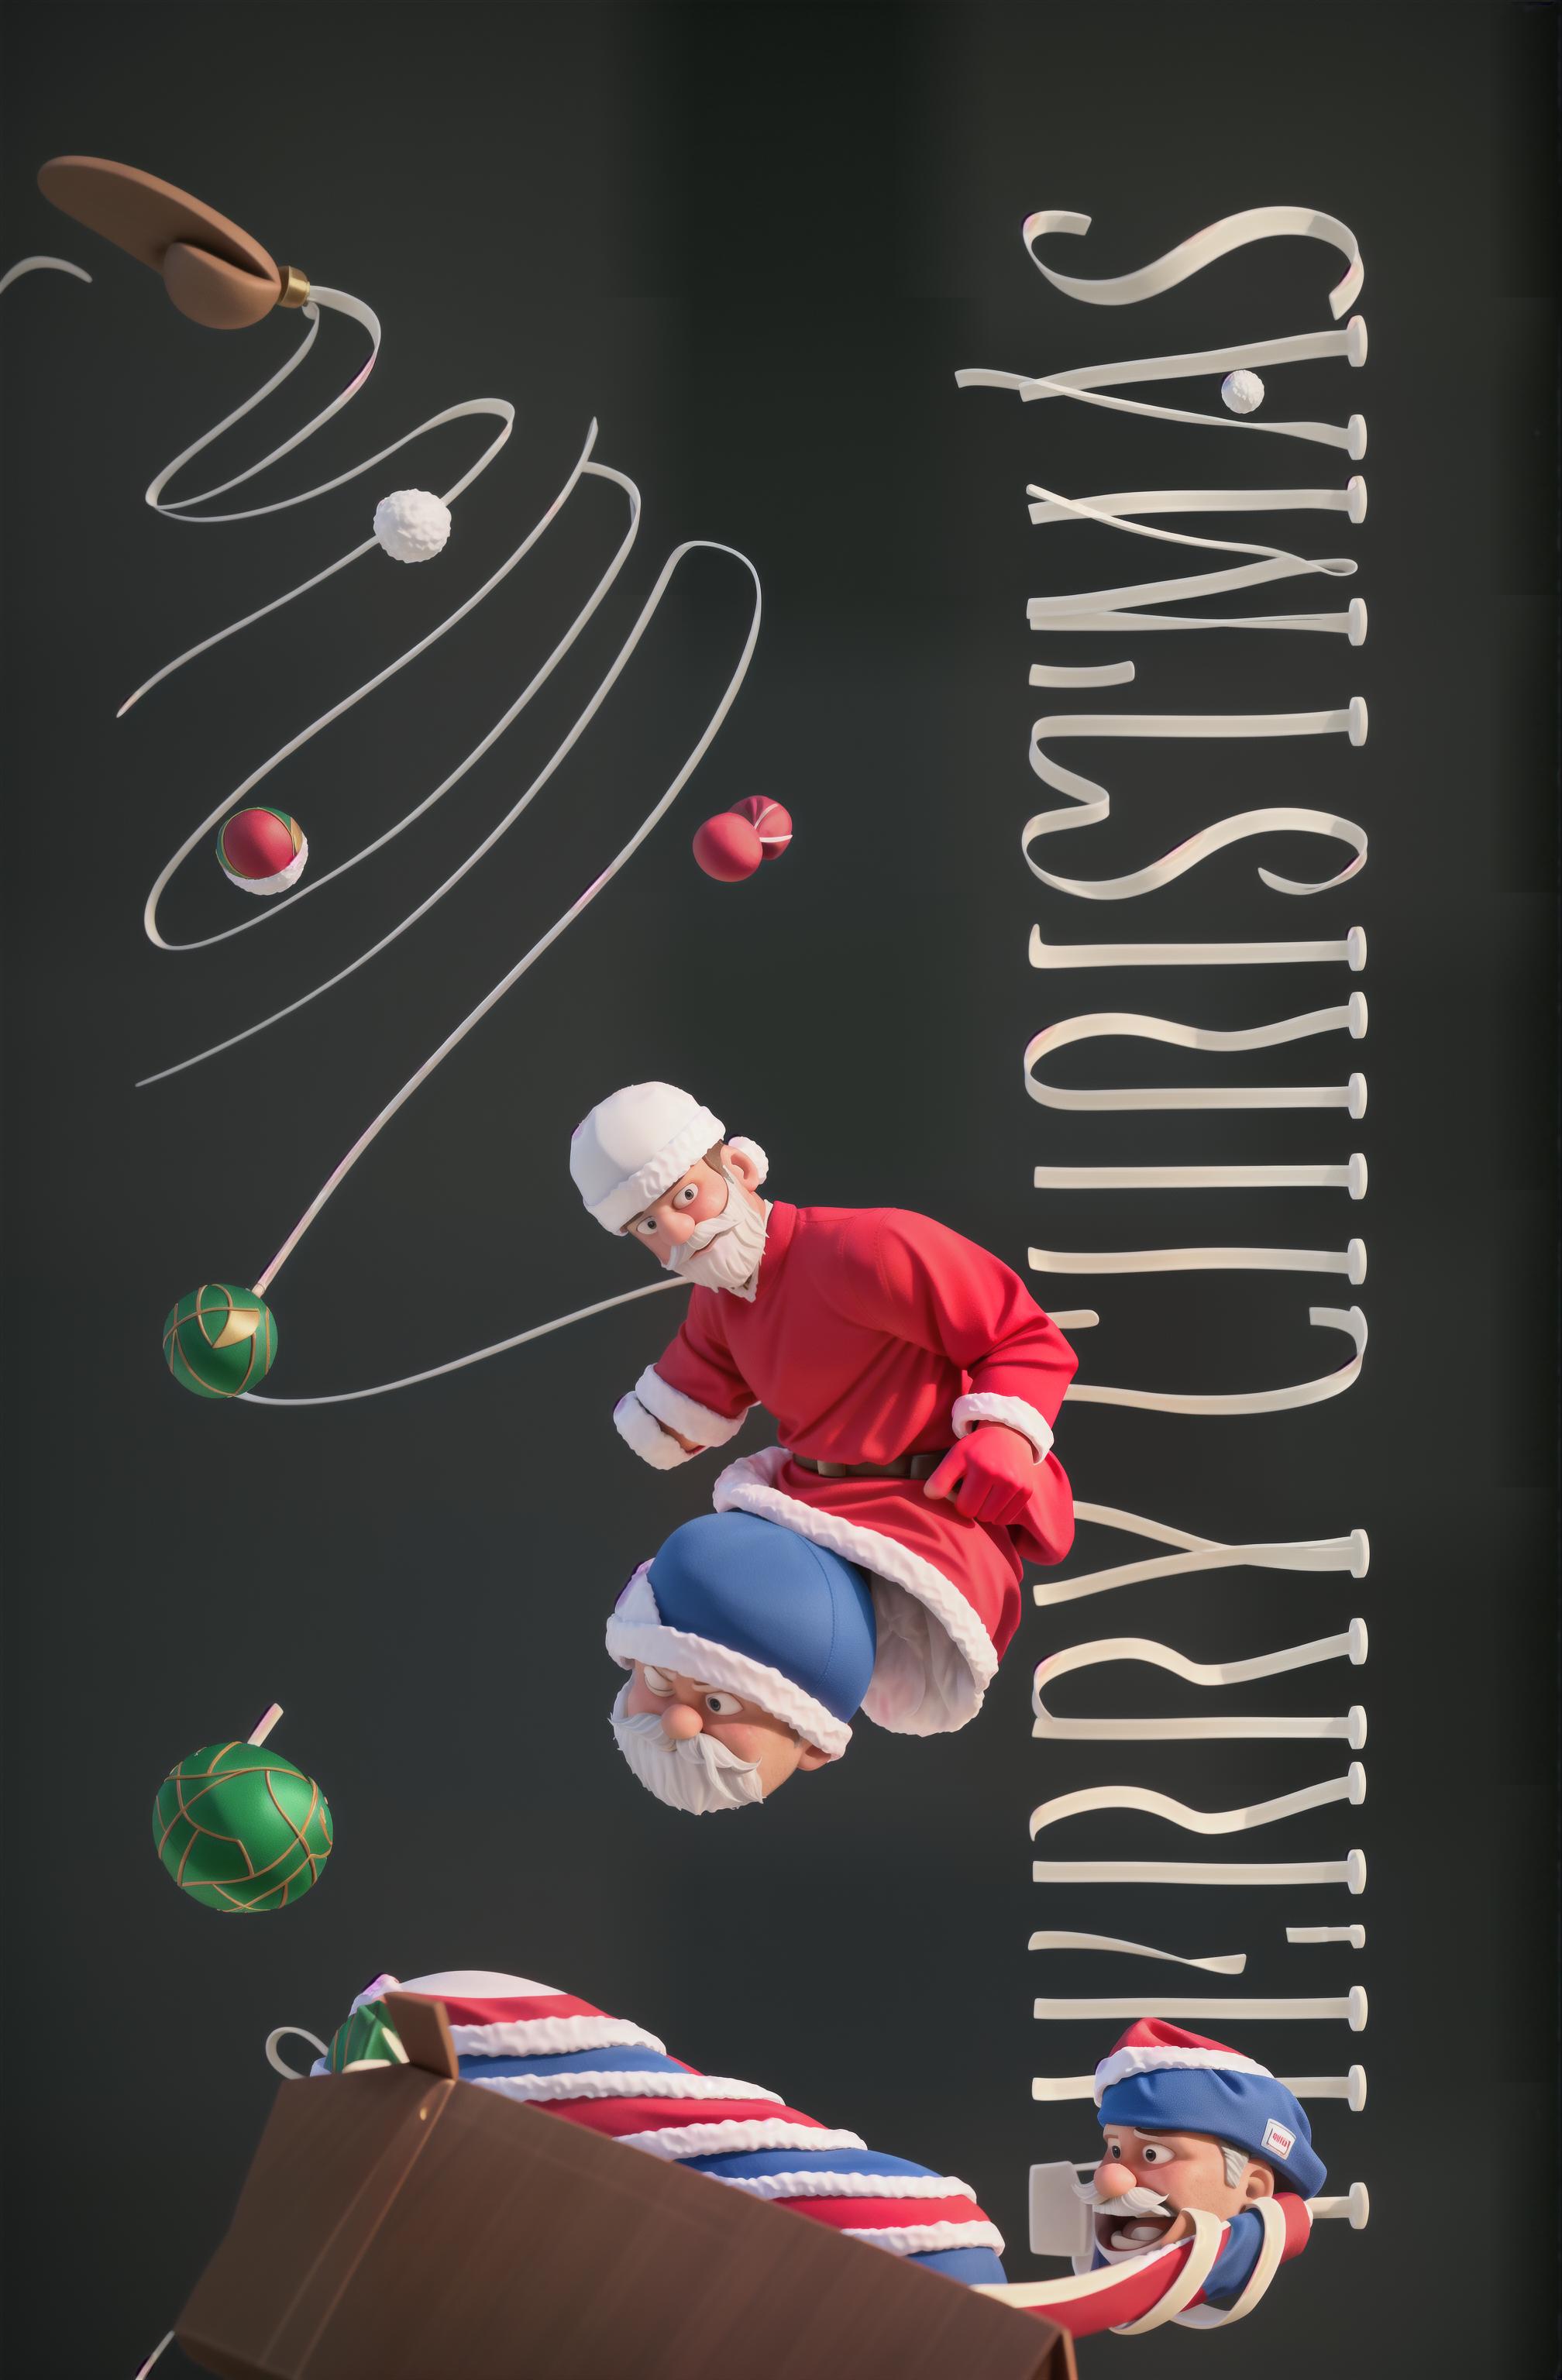  Masterpiece, best quality, sport, ice hockey, Christmas, hockey player, Christmas candy cane in hand, Santa hat on player's head, Santa hat, candy cane hit Christmas gift box